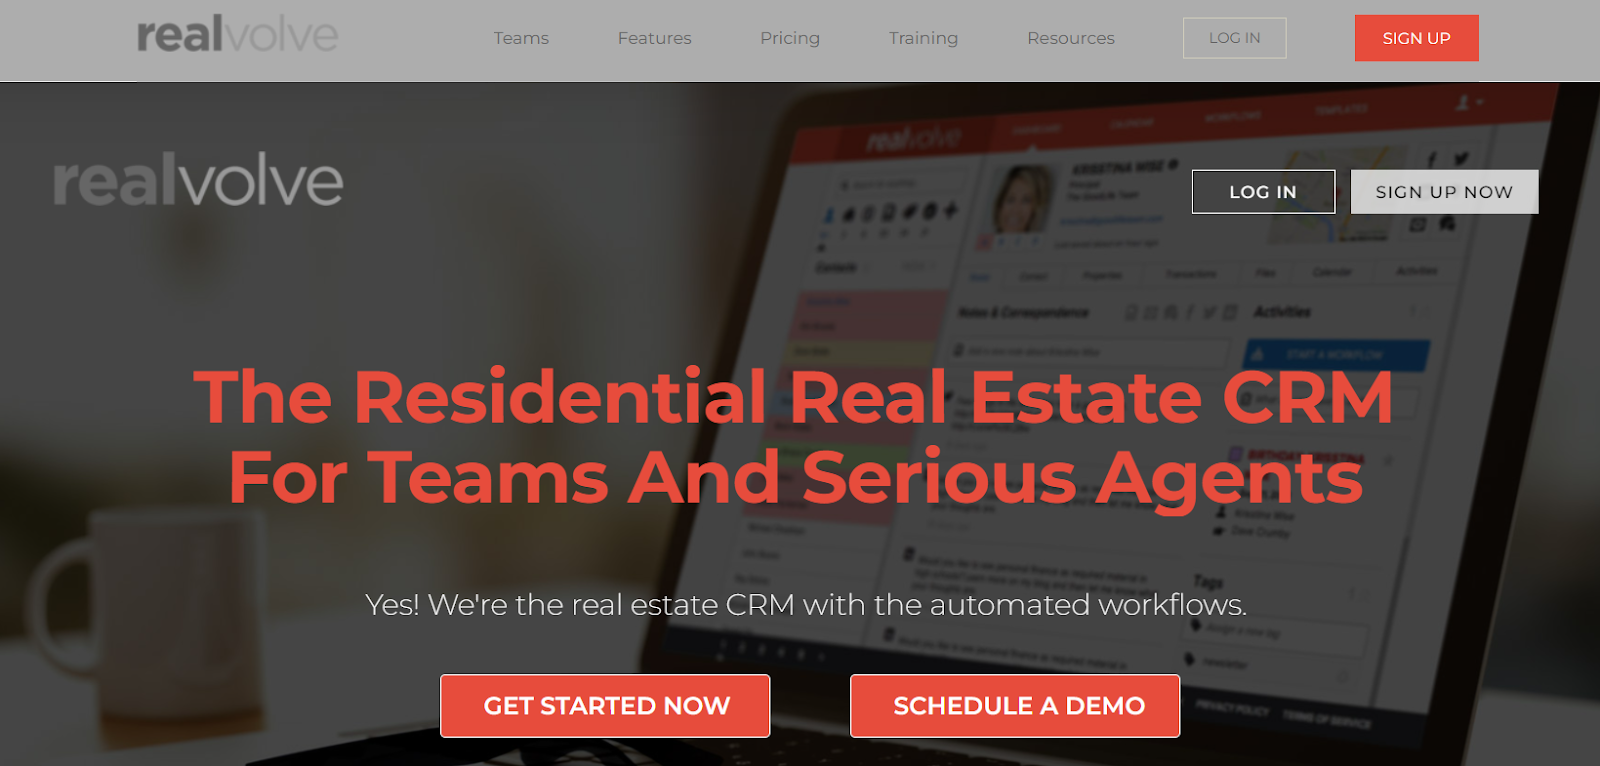 RealVolve is a good CRM for real estate agents.